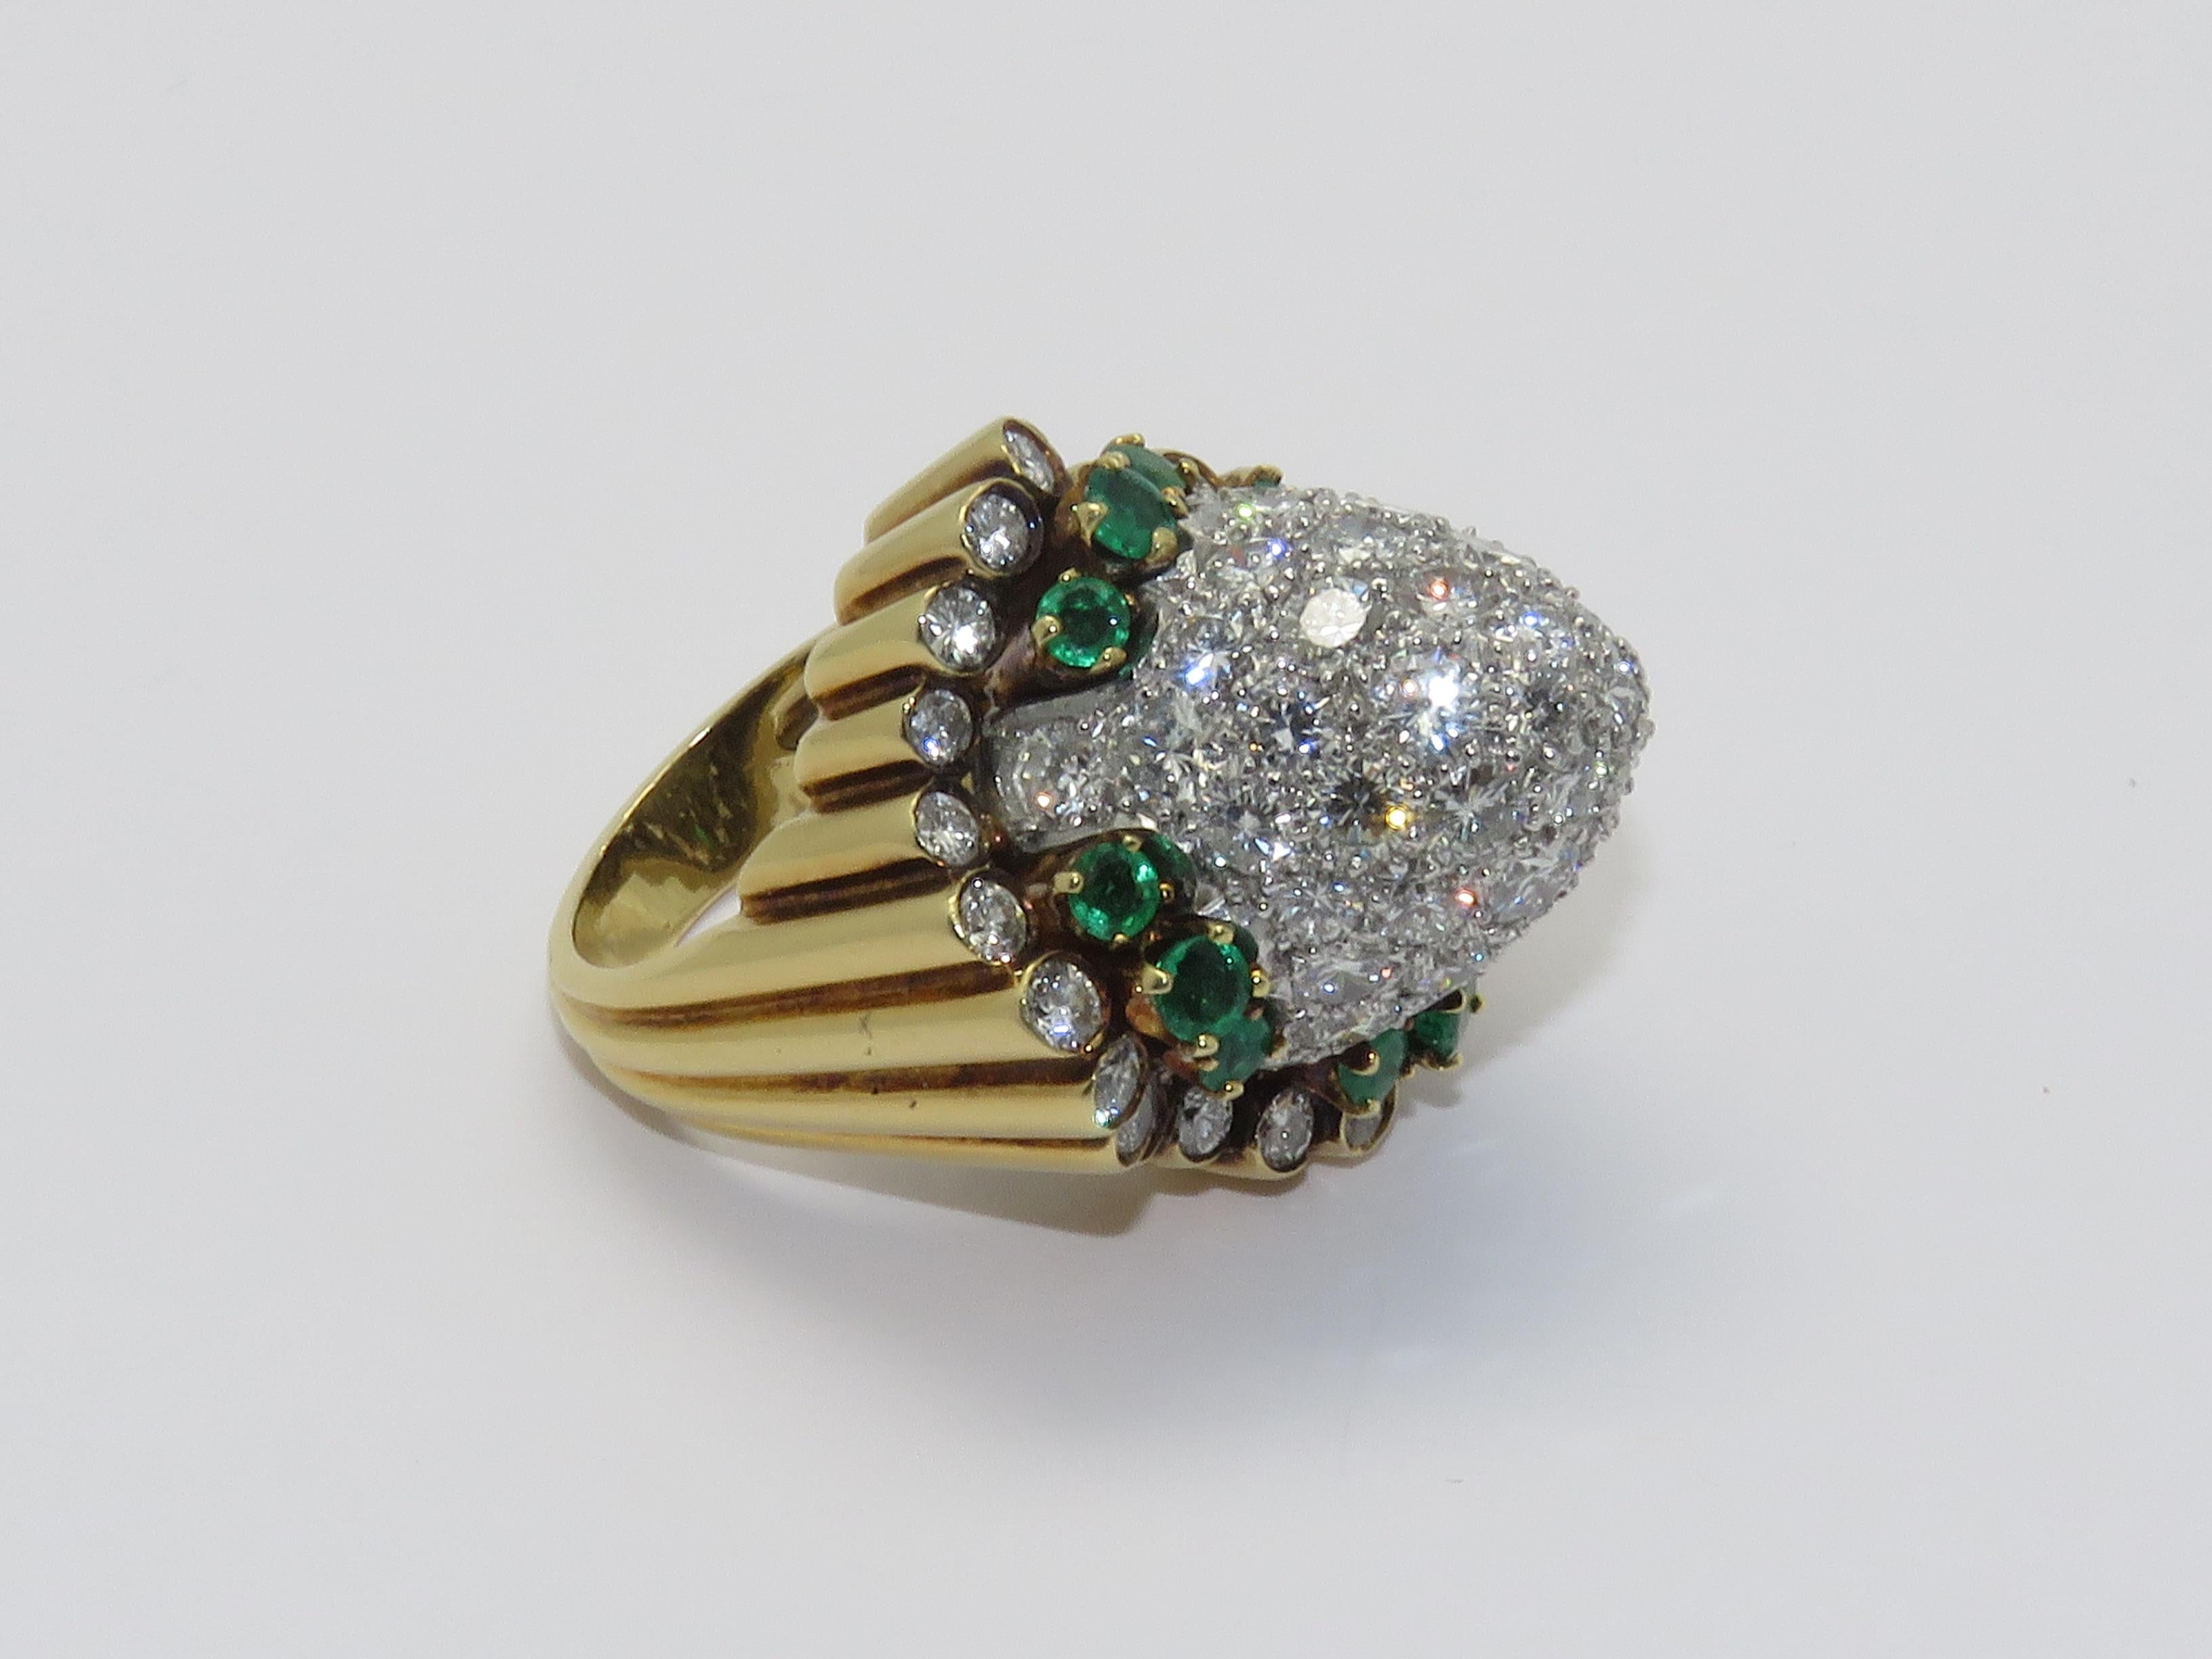  1960 s Beautiful Ring.
A diamond , emerald , 18k yellow gold and platinum ring.
French Marks
Diamond: 7 cts Approximately
Emerald: 1.50 ct Approximately

Ring size: 52     6 US
Measurements
Height: 1.57 in ( 4 cm )    Lenght: 1.10 in ( 2.80 cm )  